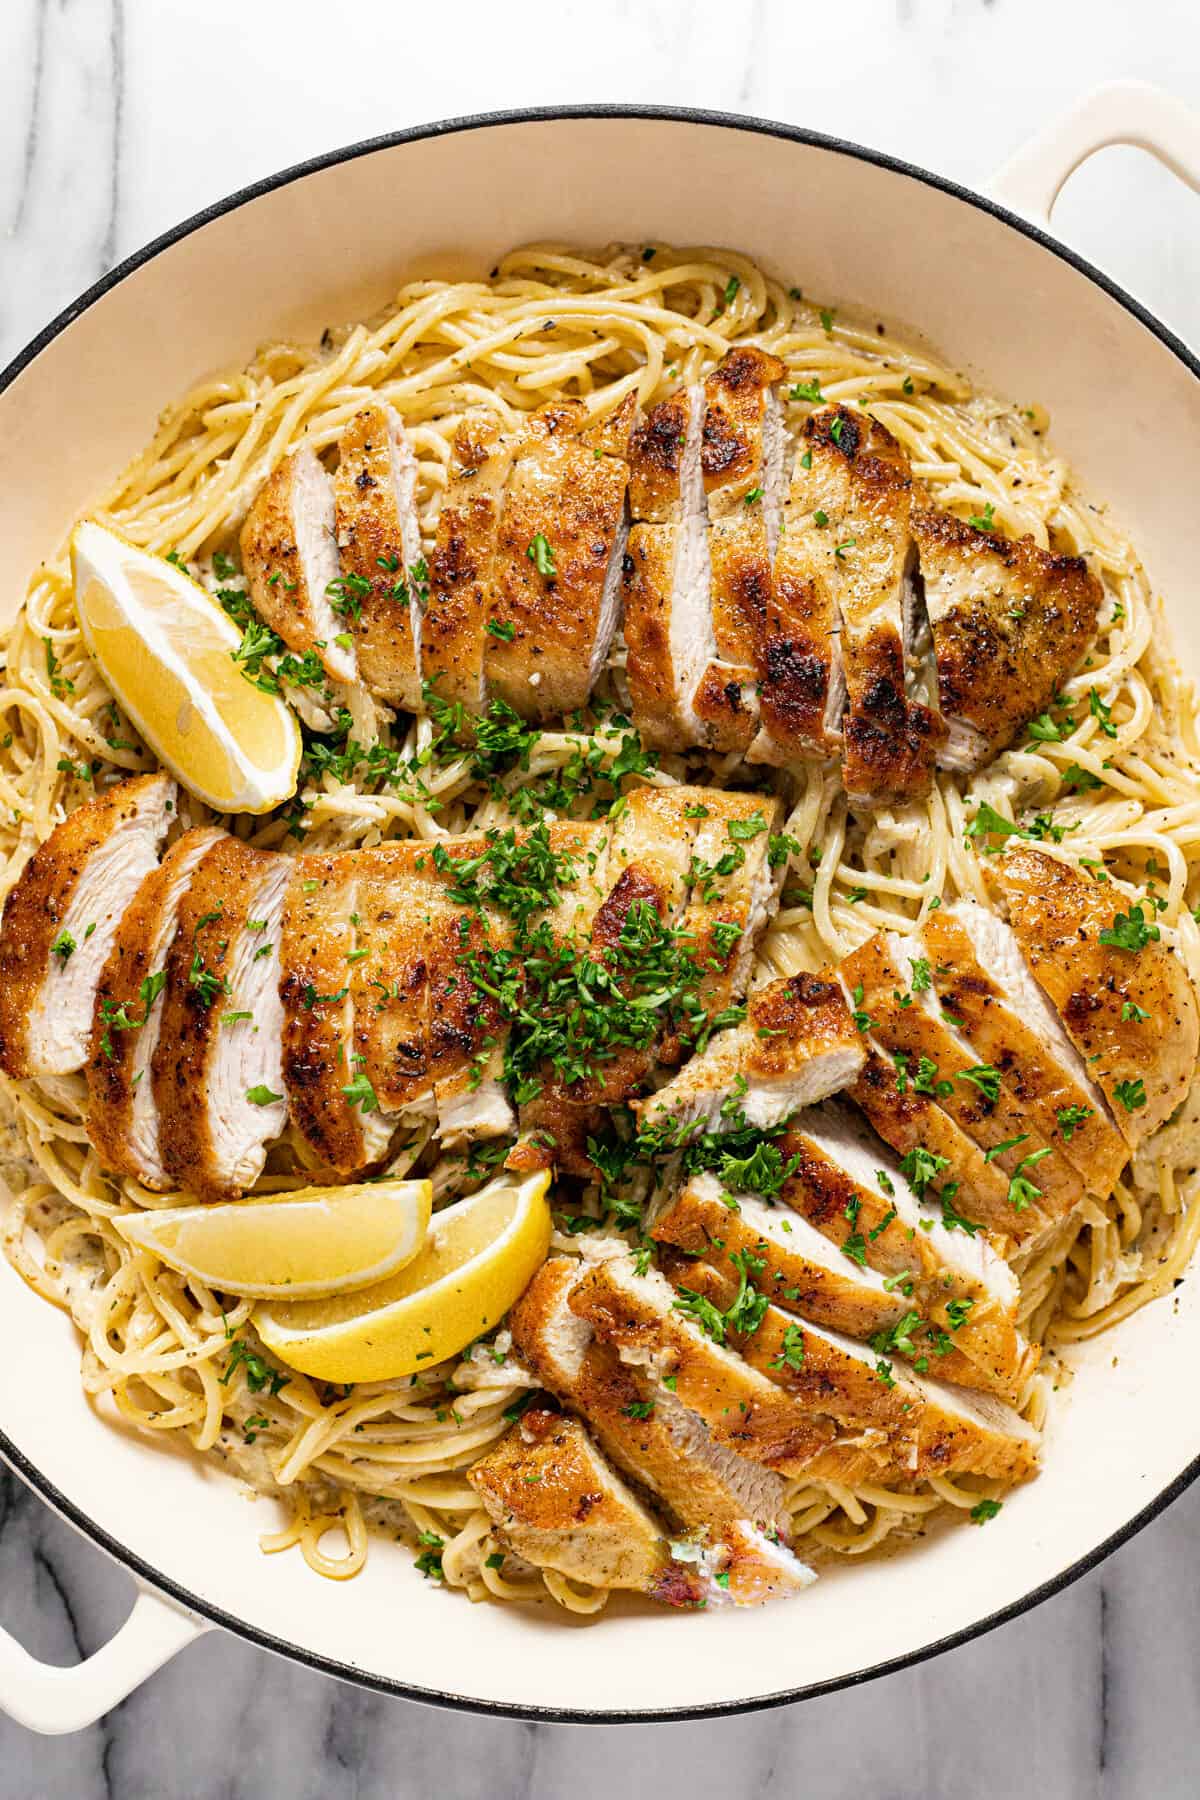 Large white pan filled with creamy spaghetti and sliced lemon chicken garnished with parsley.